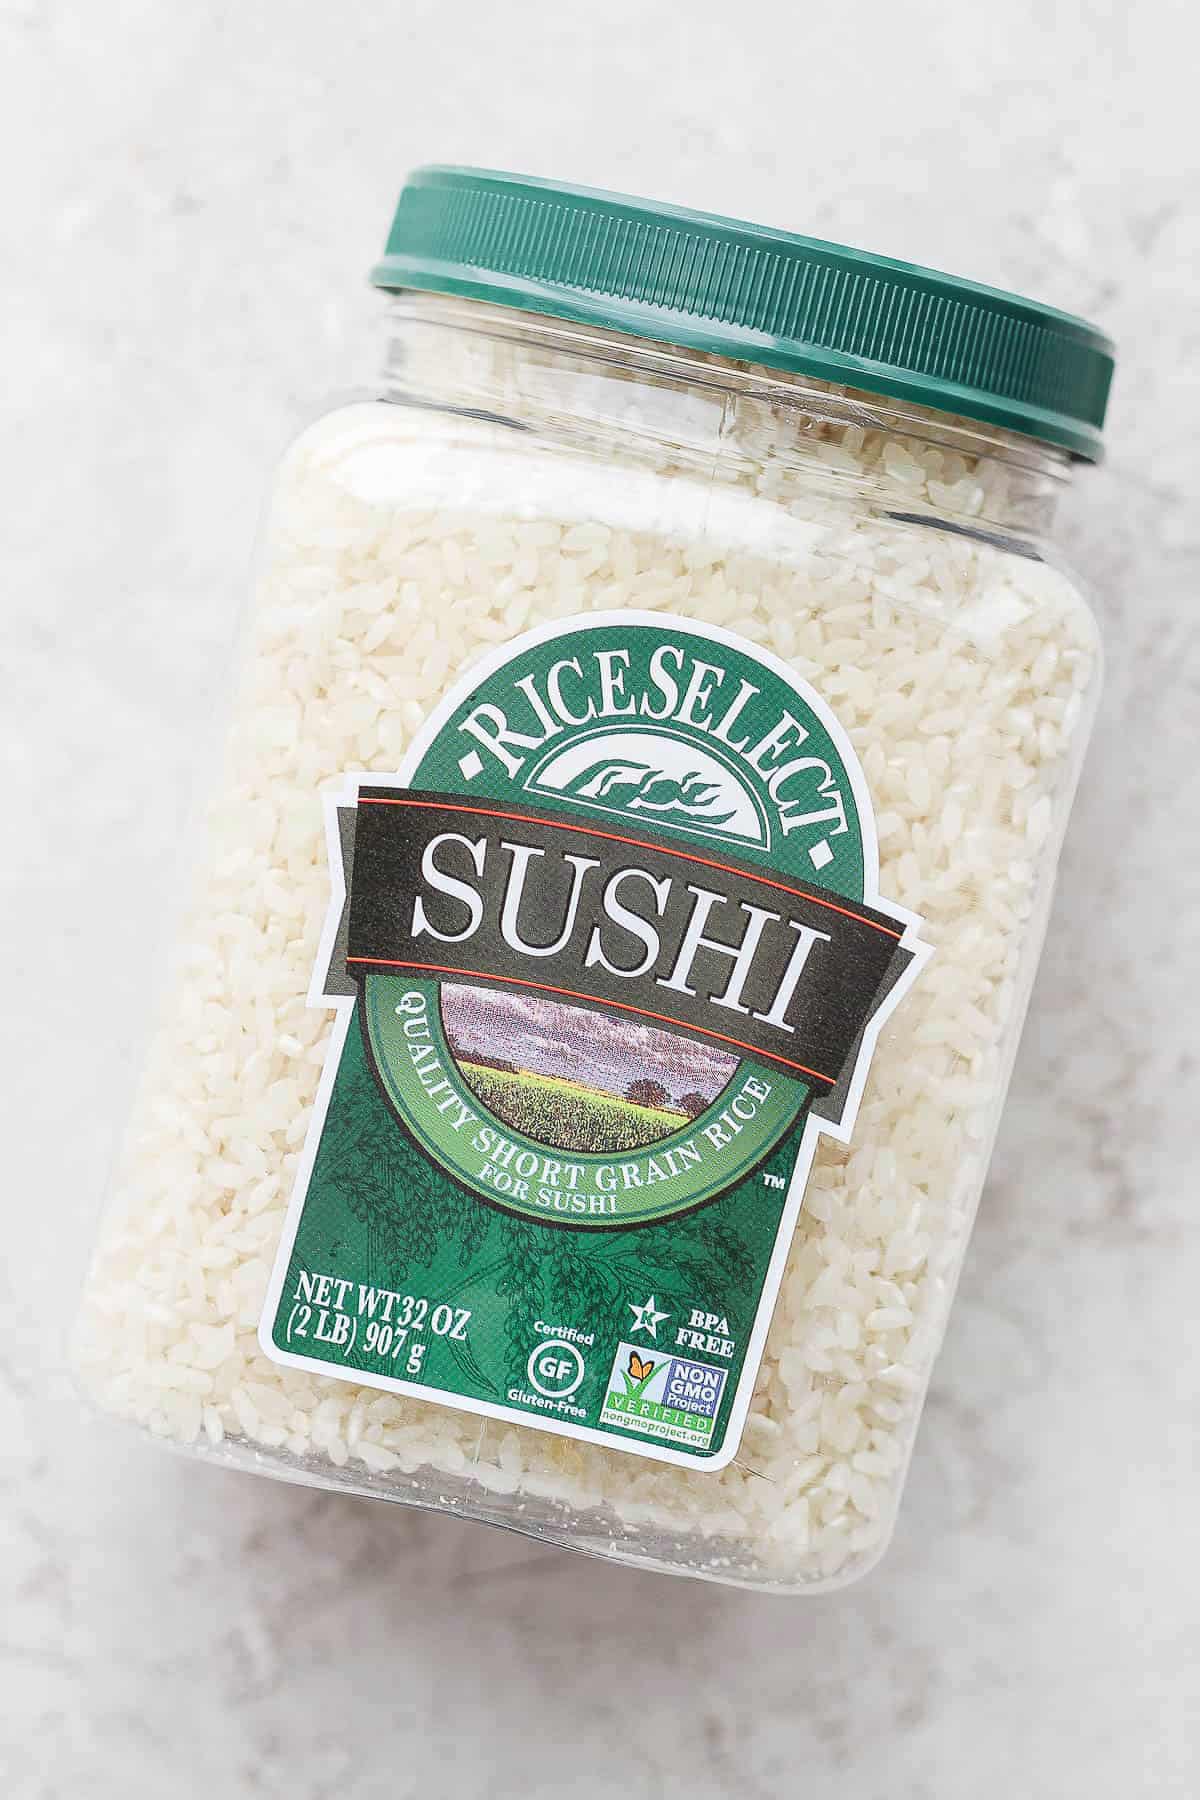 A container of RiceSelect sushi rice.